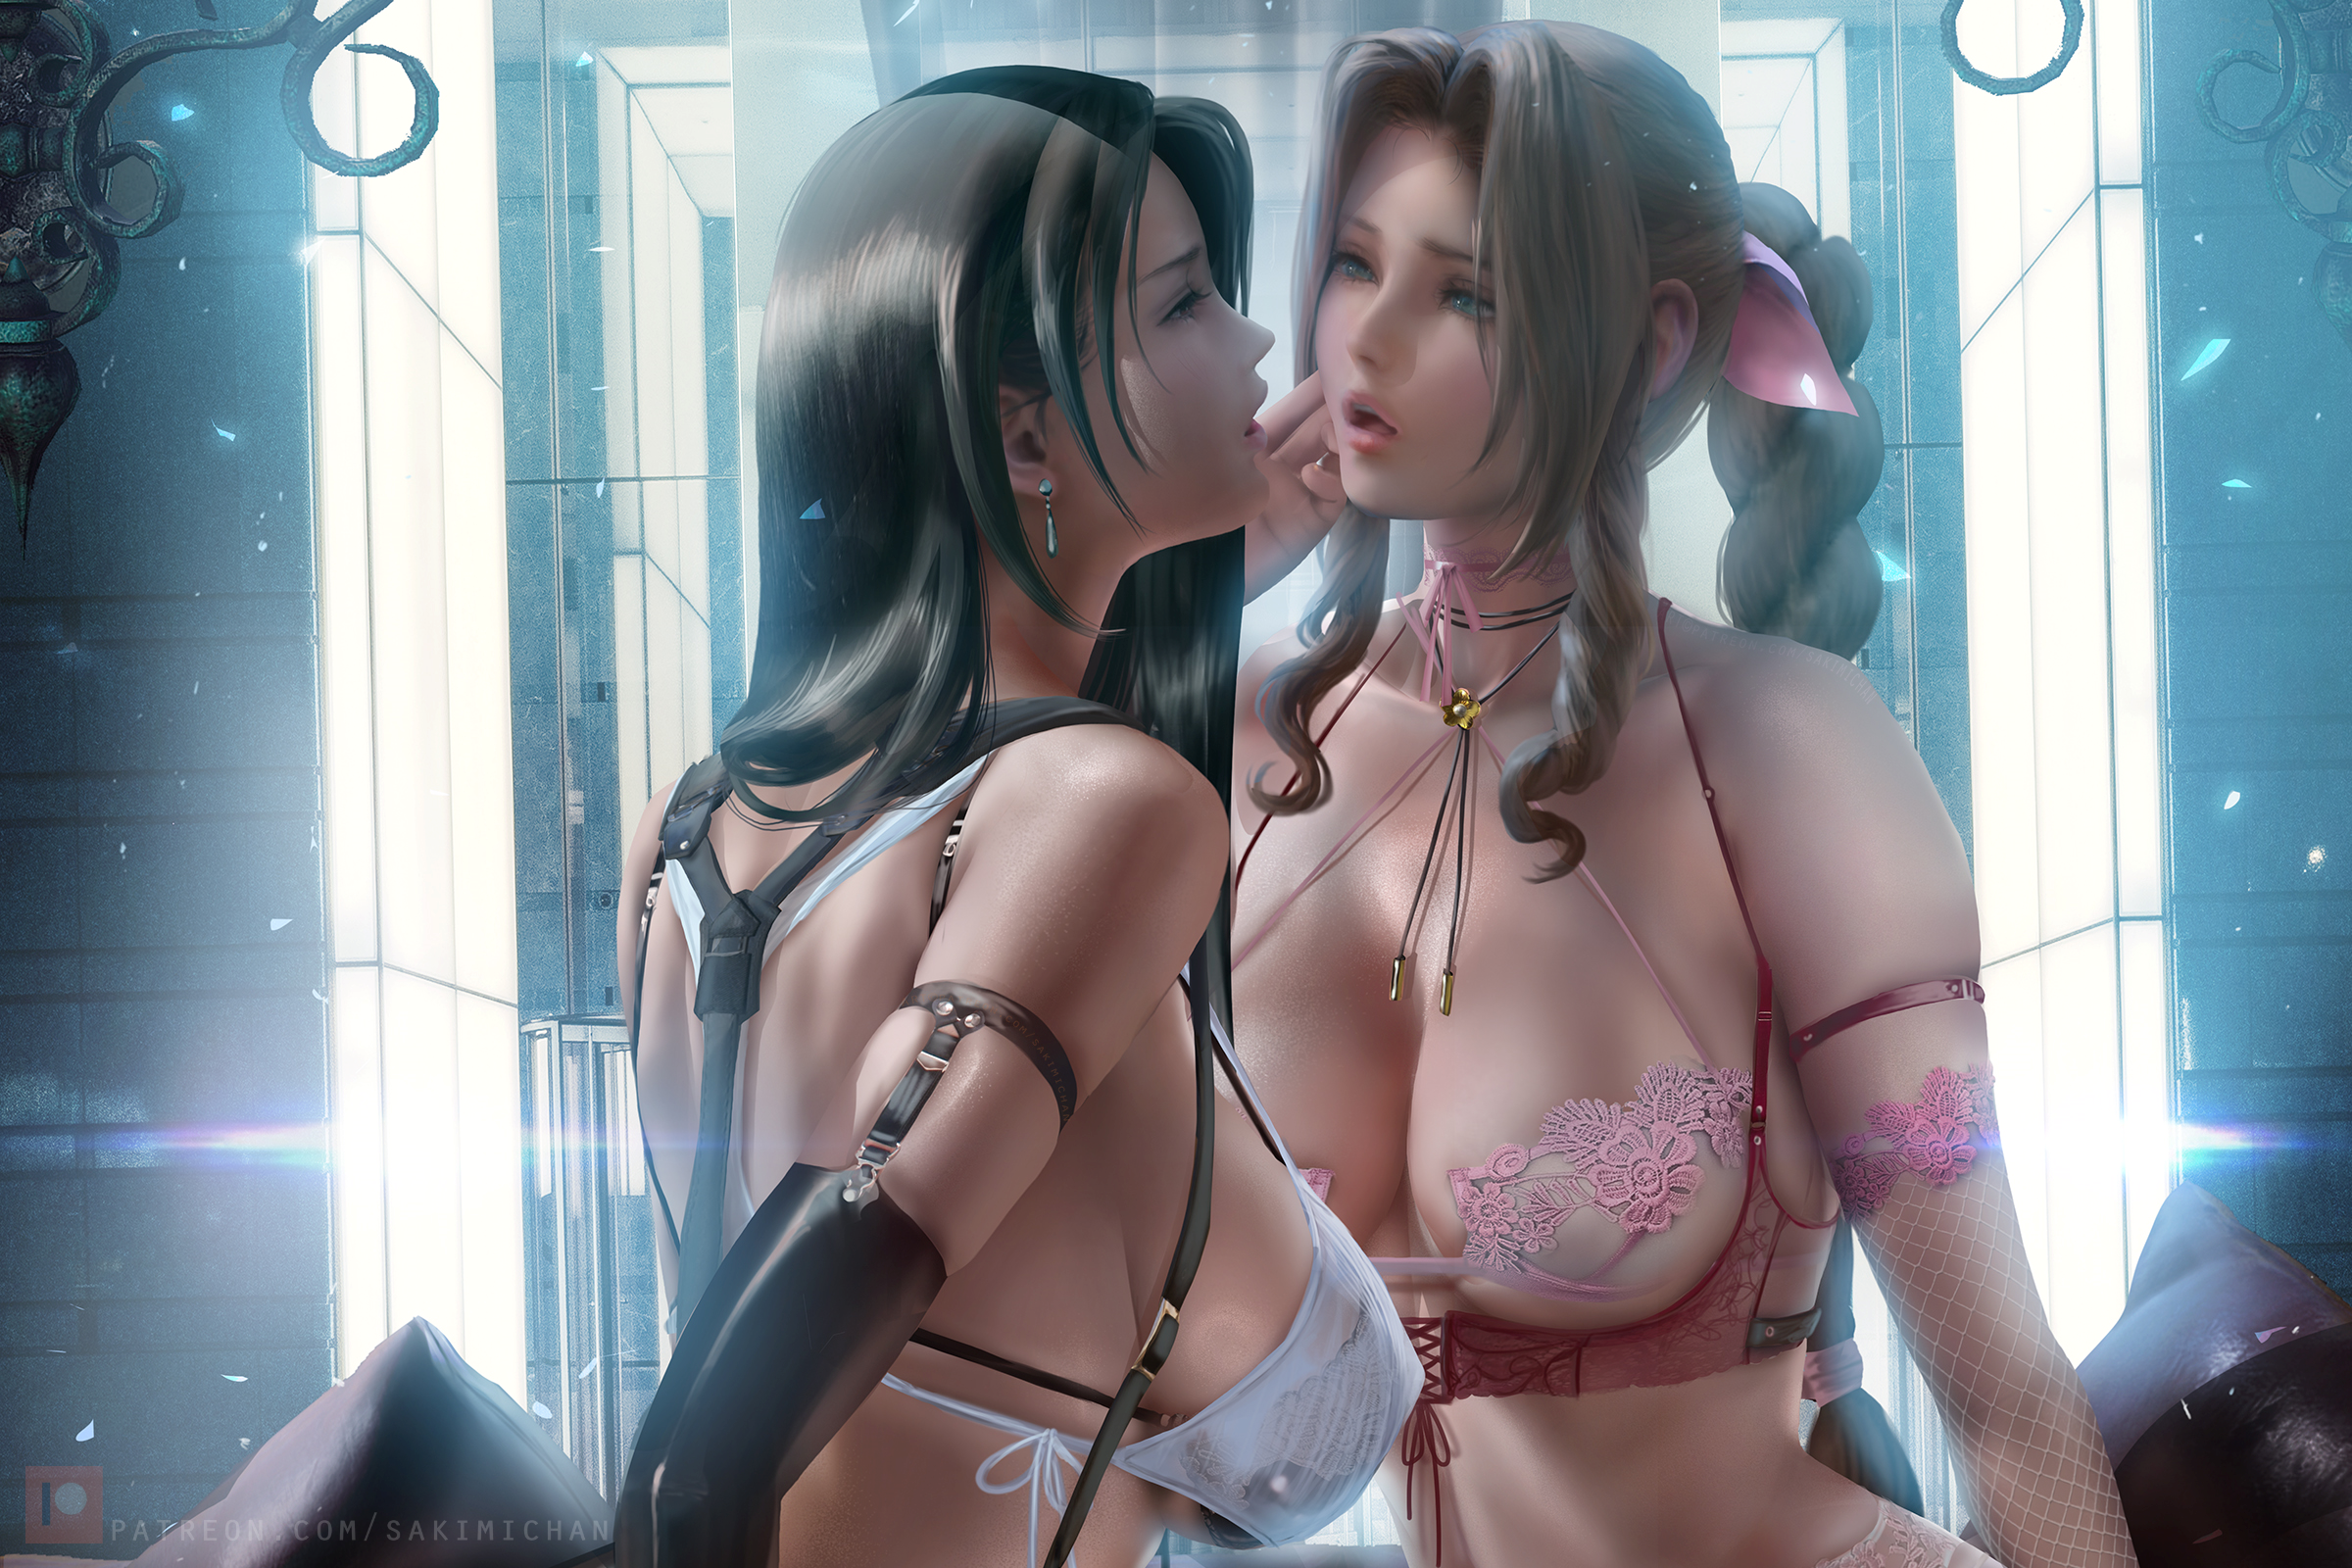 General 2400x1600 Tifa Lockhart Aerith Gainsborough Final Fantasy video games video game girls brunette black hair face to face open mouth profile suspenders lingerie underwear bra fishnet 2D artwork fan art Sakimichan lace boobs big boobs video game characters two women